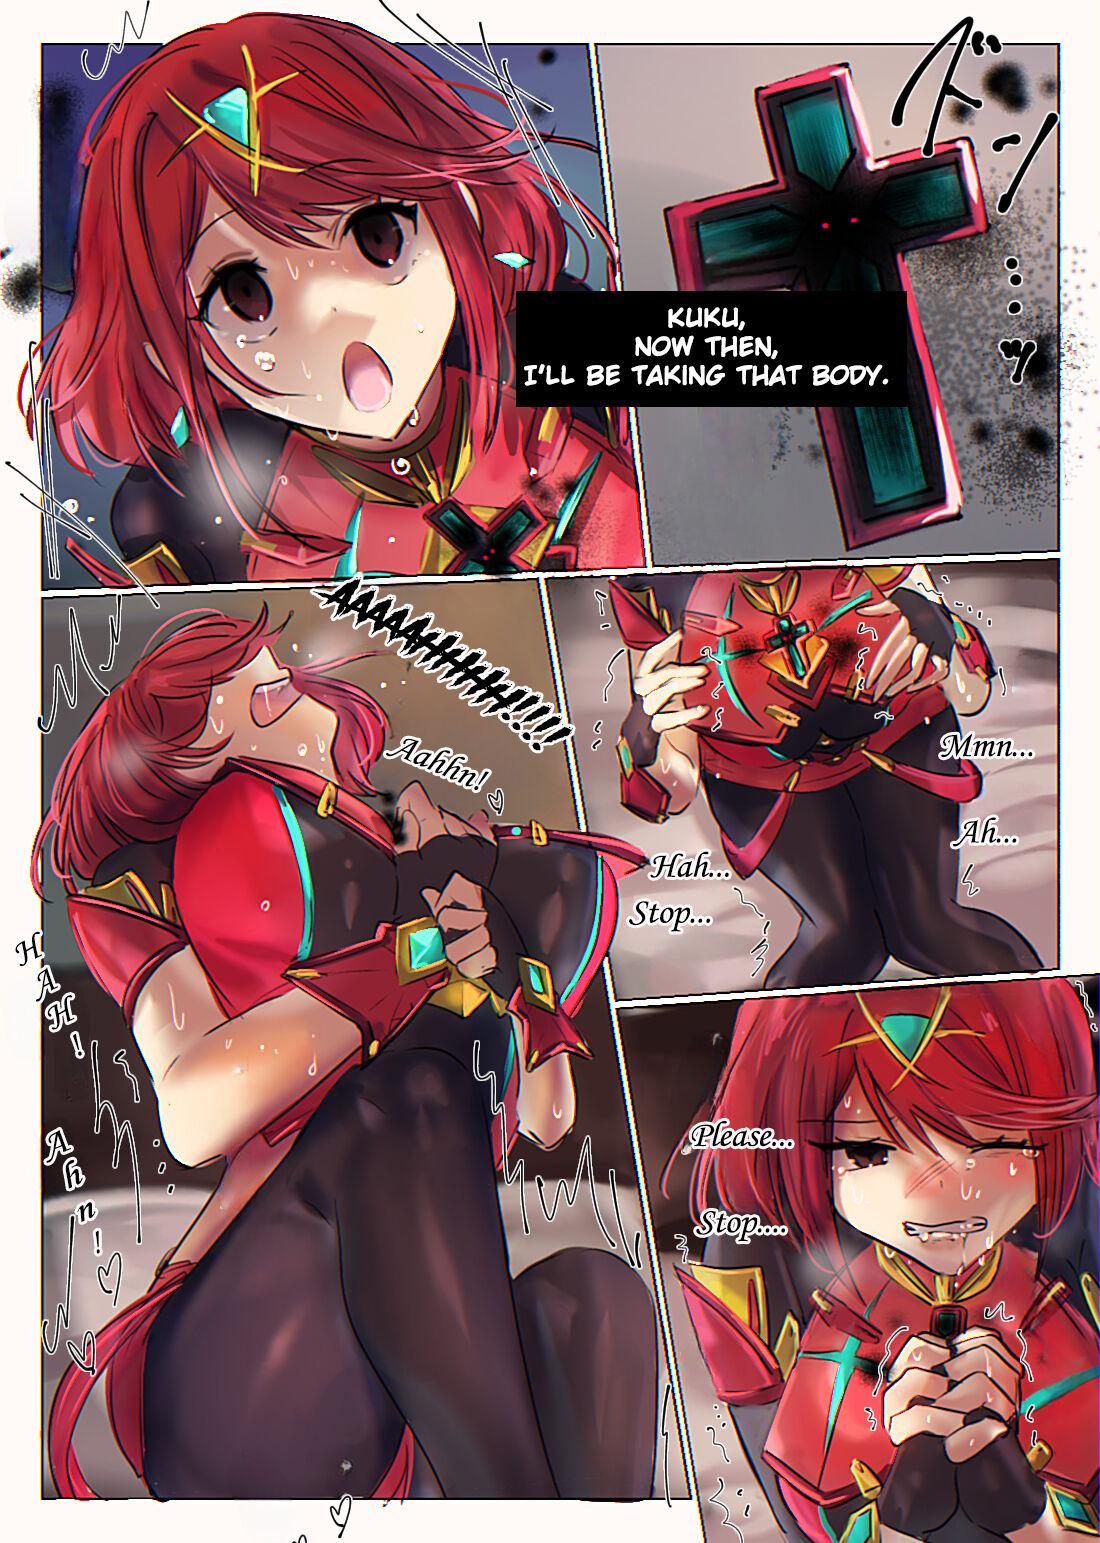 Stepbrother Possessing Pyra and Mythra - Xenoblade chronicles 2 Amateur Blowjob - Page 4